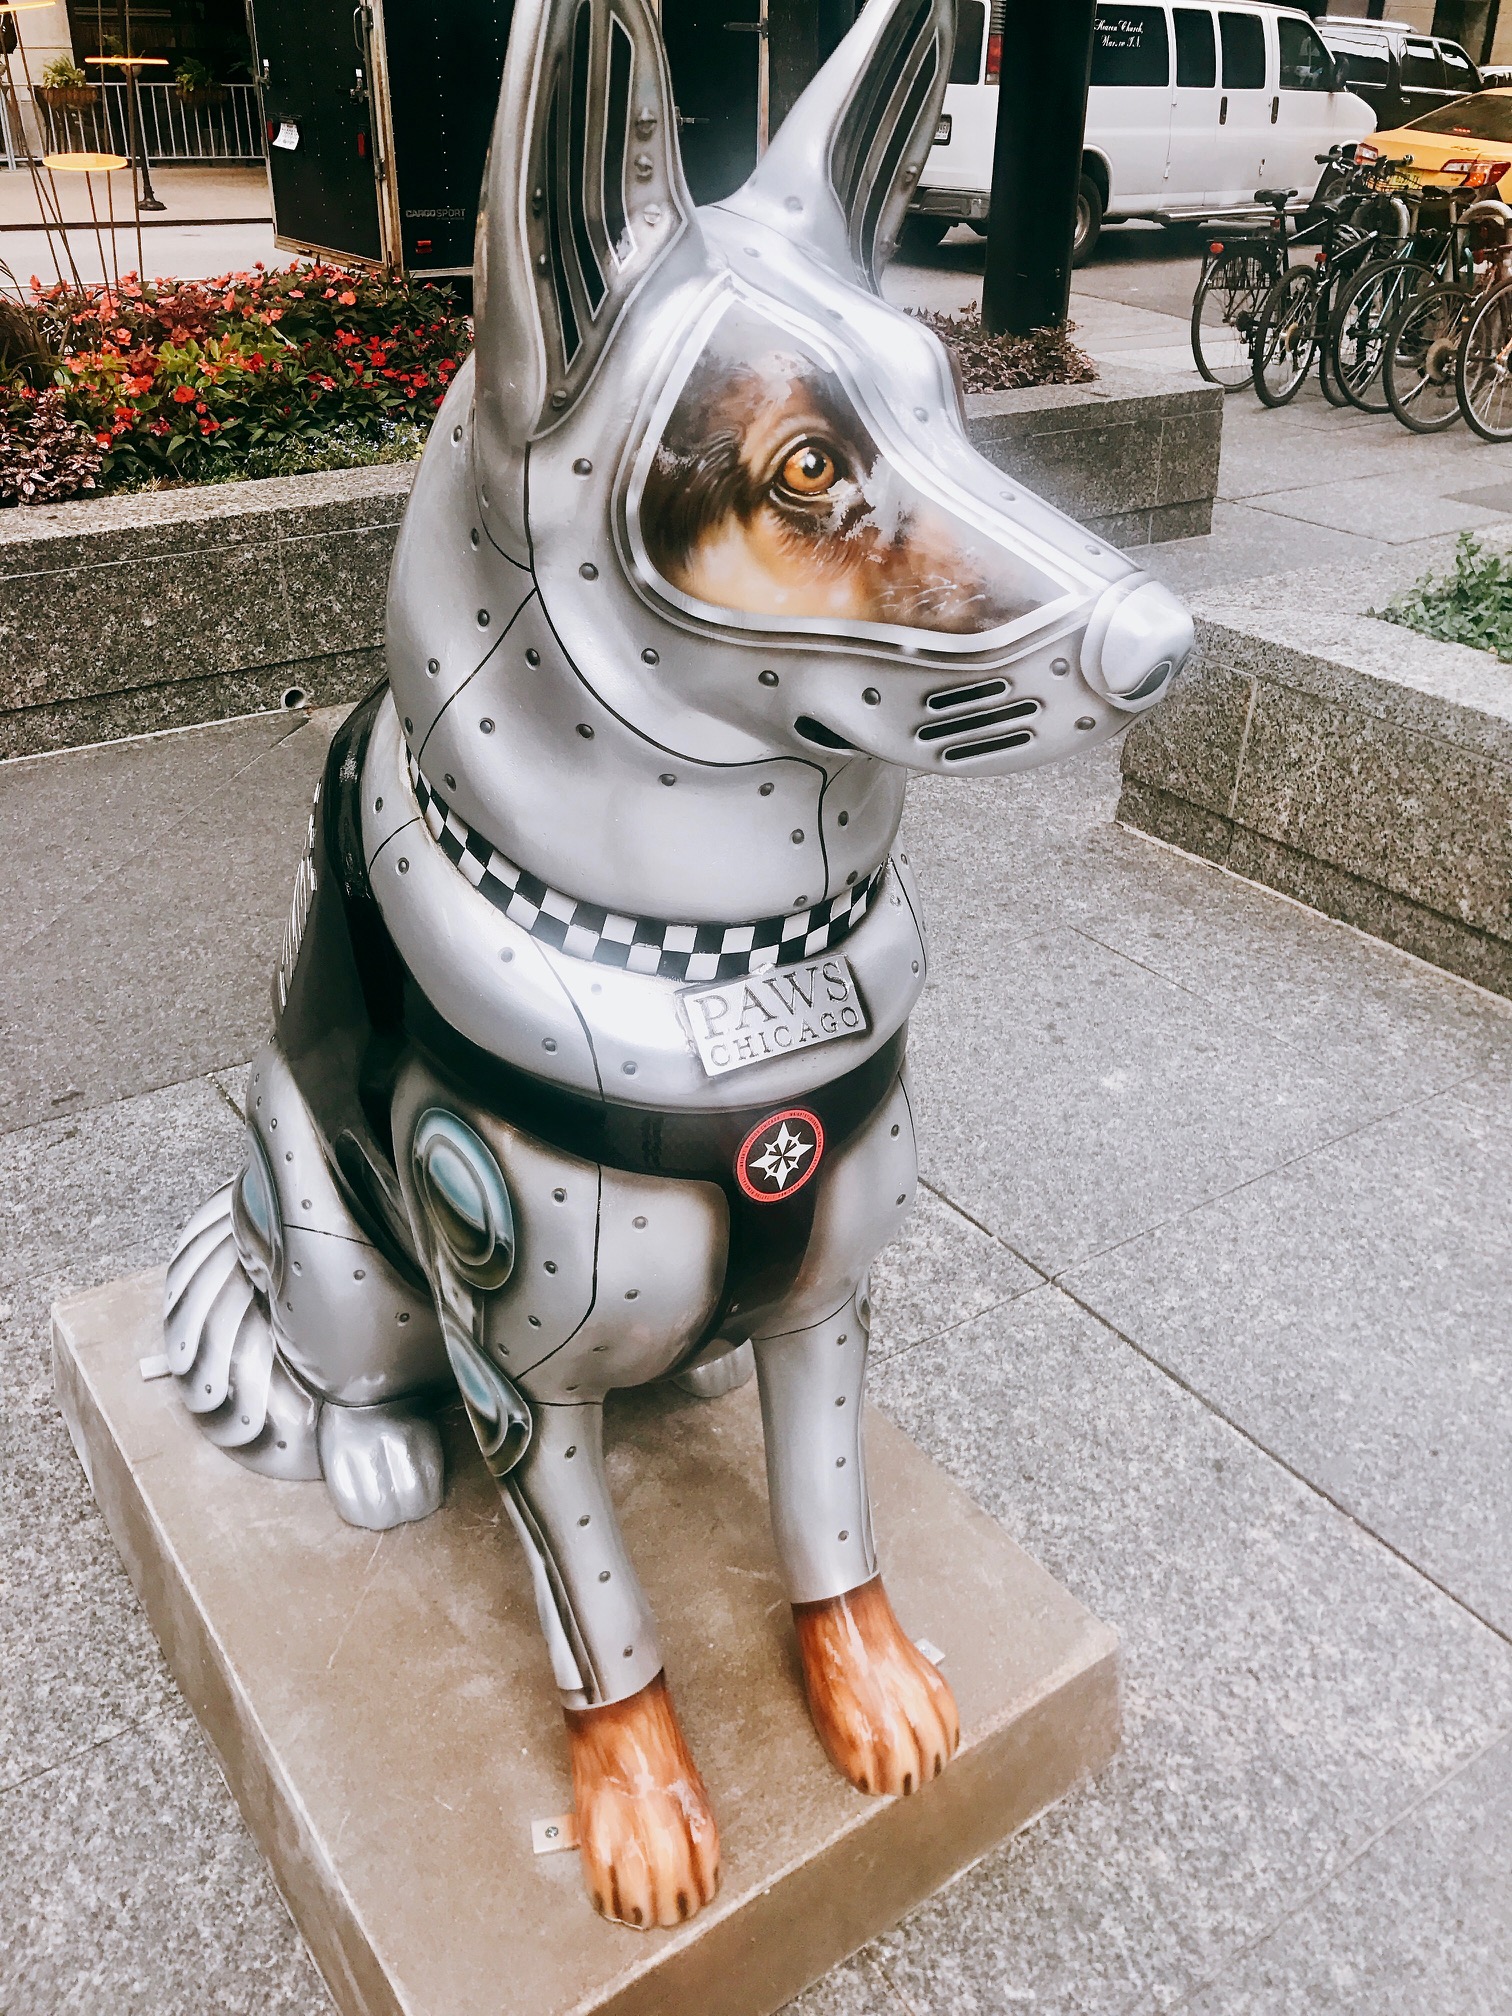 Decorated dog statue from the scheme ChicagoK9s (The Magnificent Mile Association)